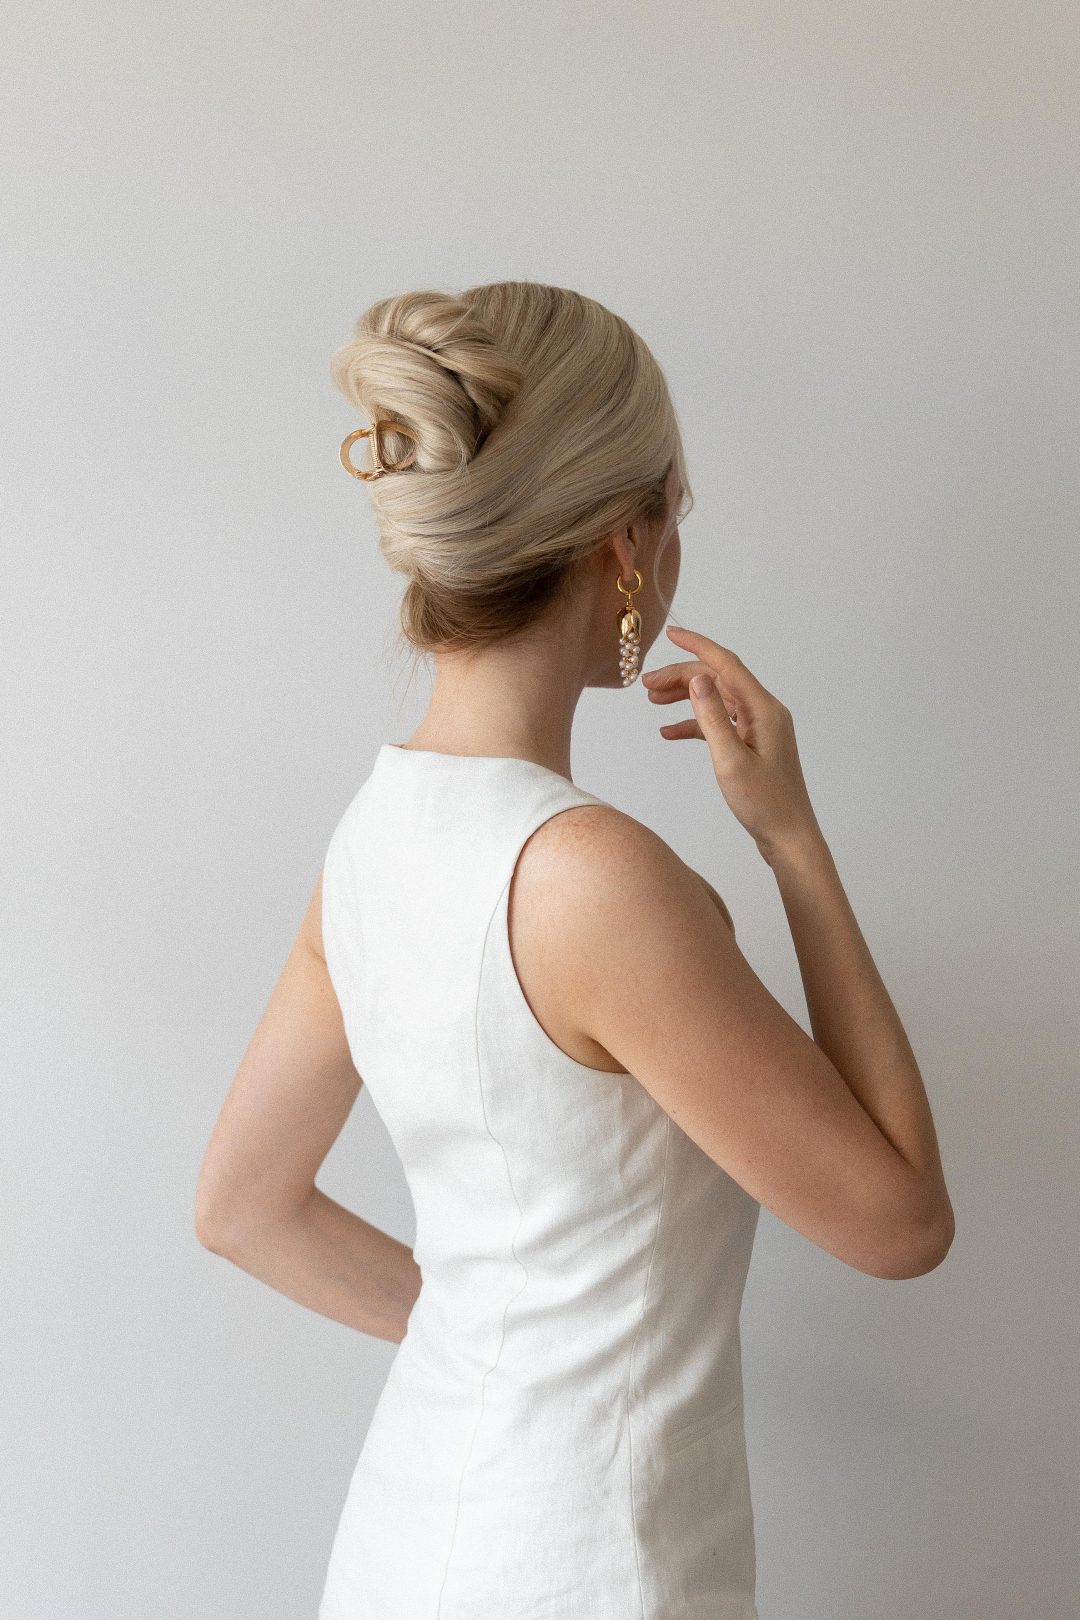 Cute simple hairstyles | the perfect wedding updo